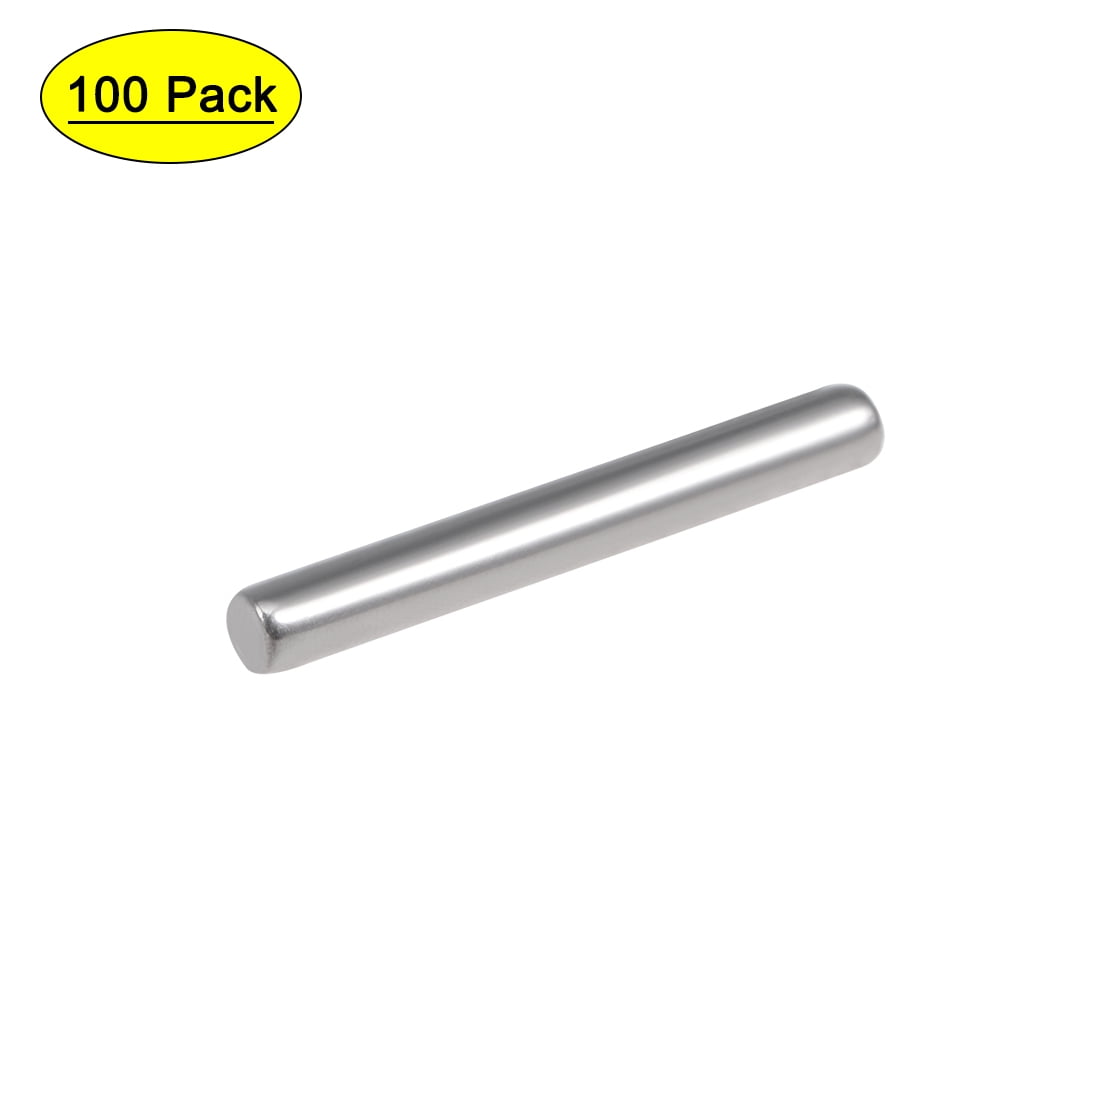 Othim 100 Pcs 304 Stainless Steel Dowel Pin, Diameter 2Mm Length 12Mm-22Mm  Cylindrical Dowel Pins Suitable for Furniture Installation,Length 12mm